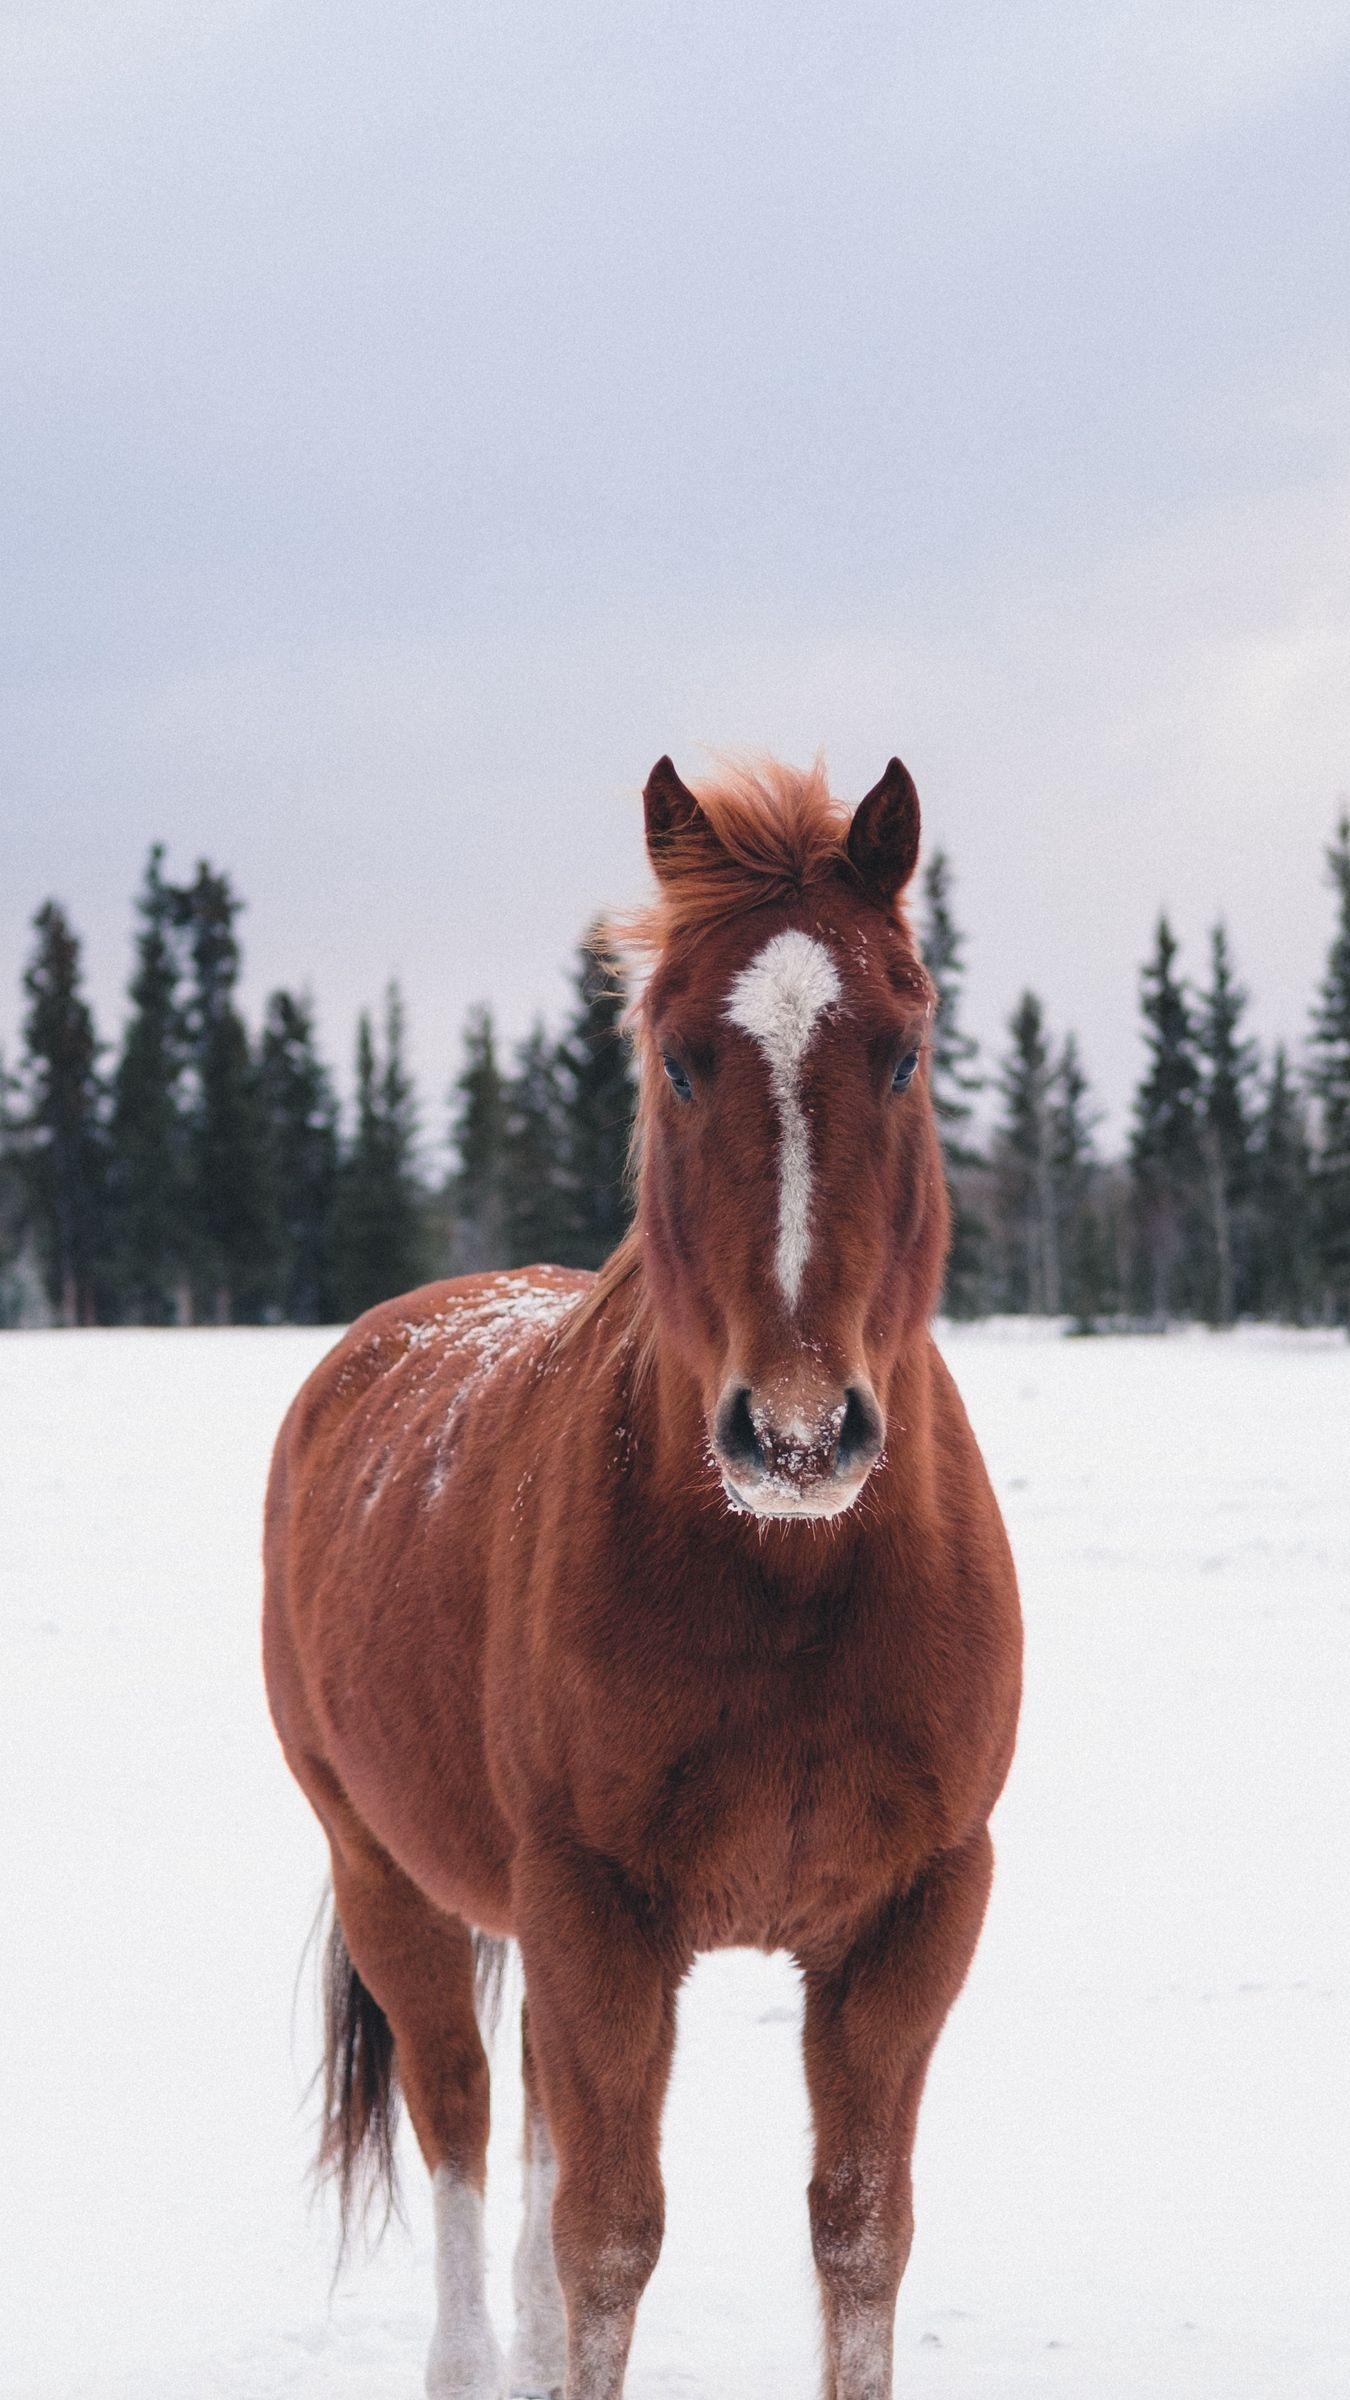 Download wallpaper 1350x2400 horse, winter, snow, forest iphone